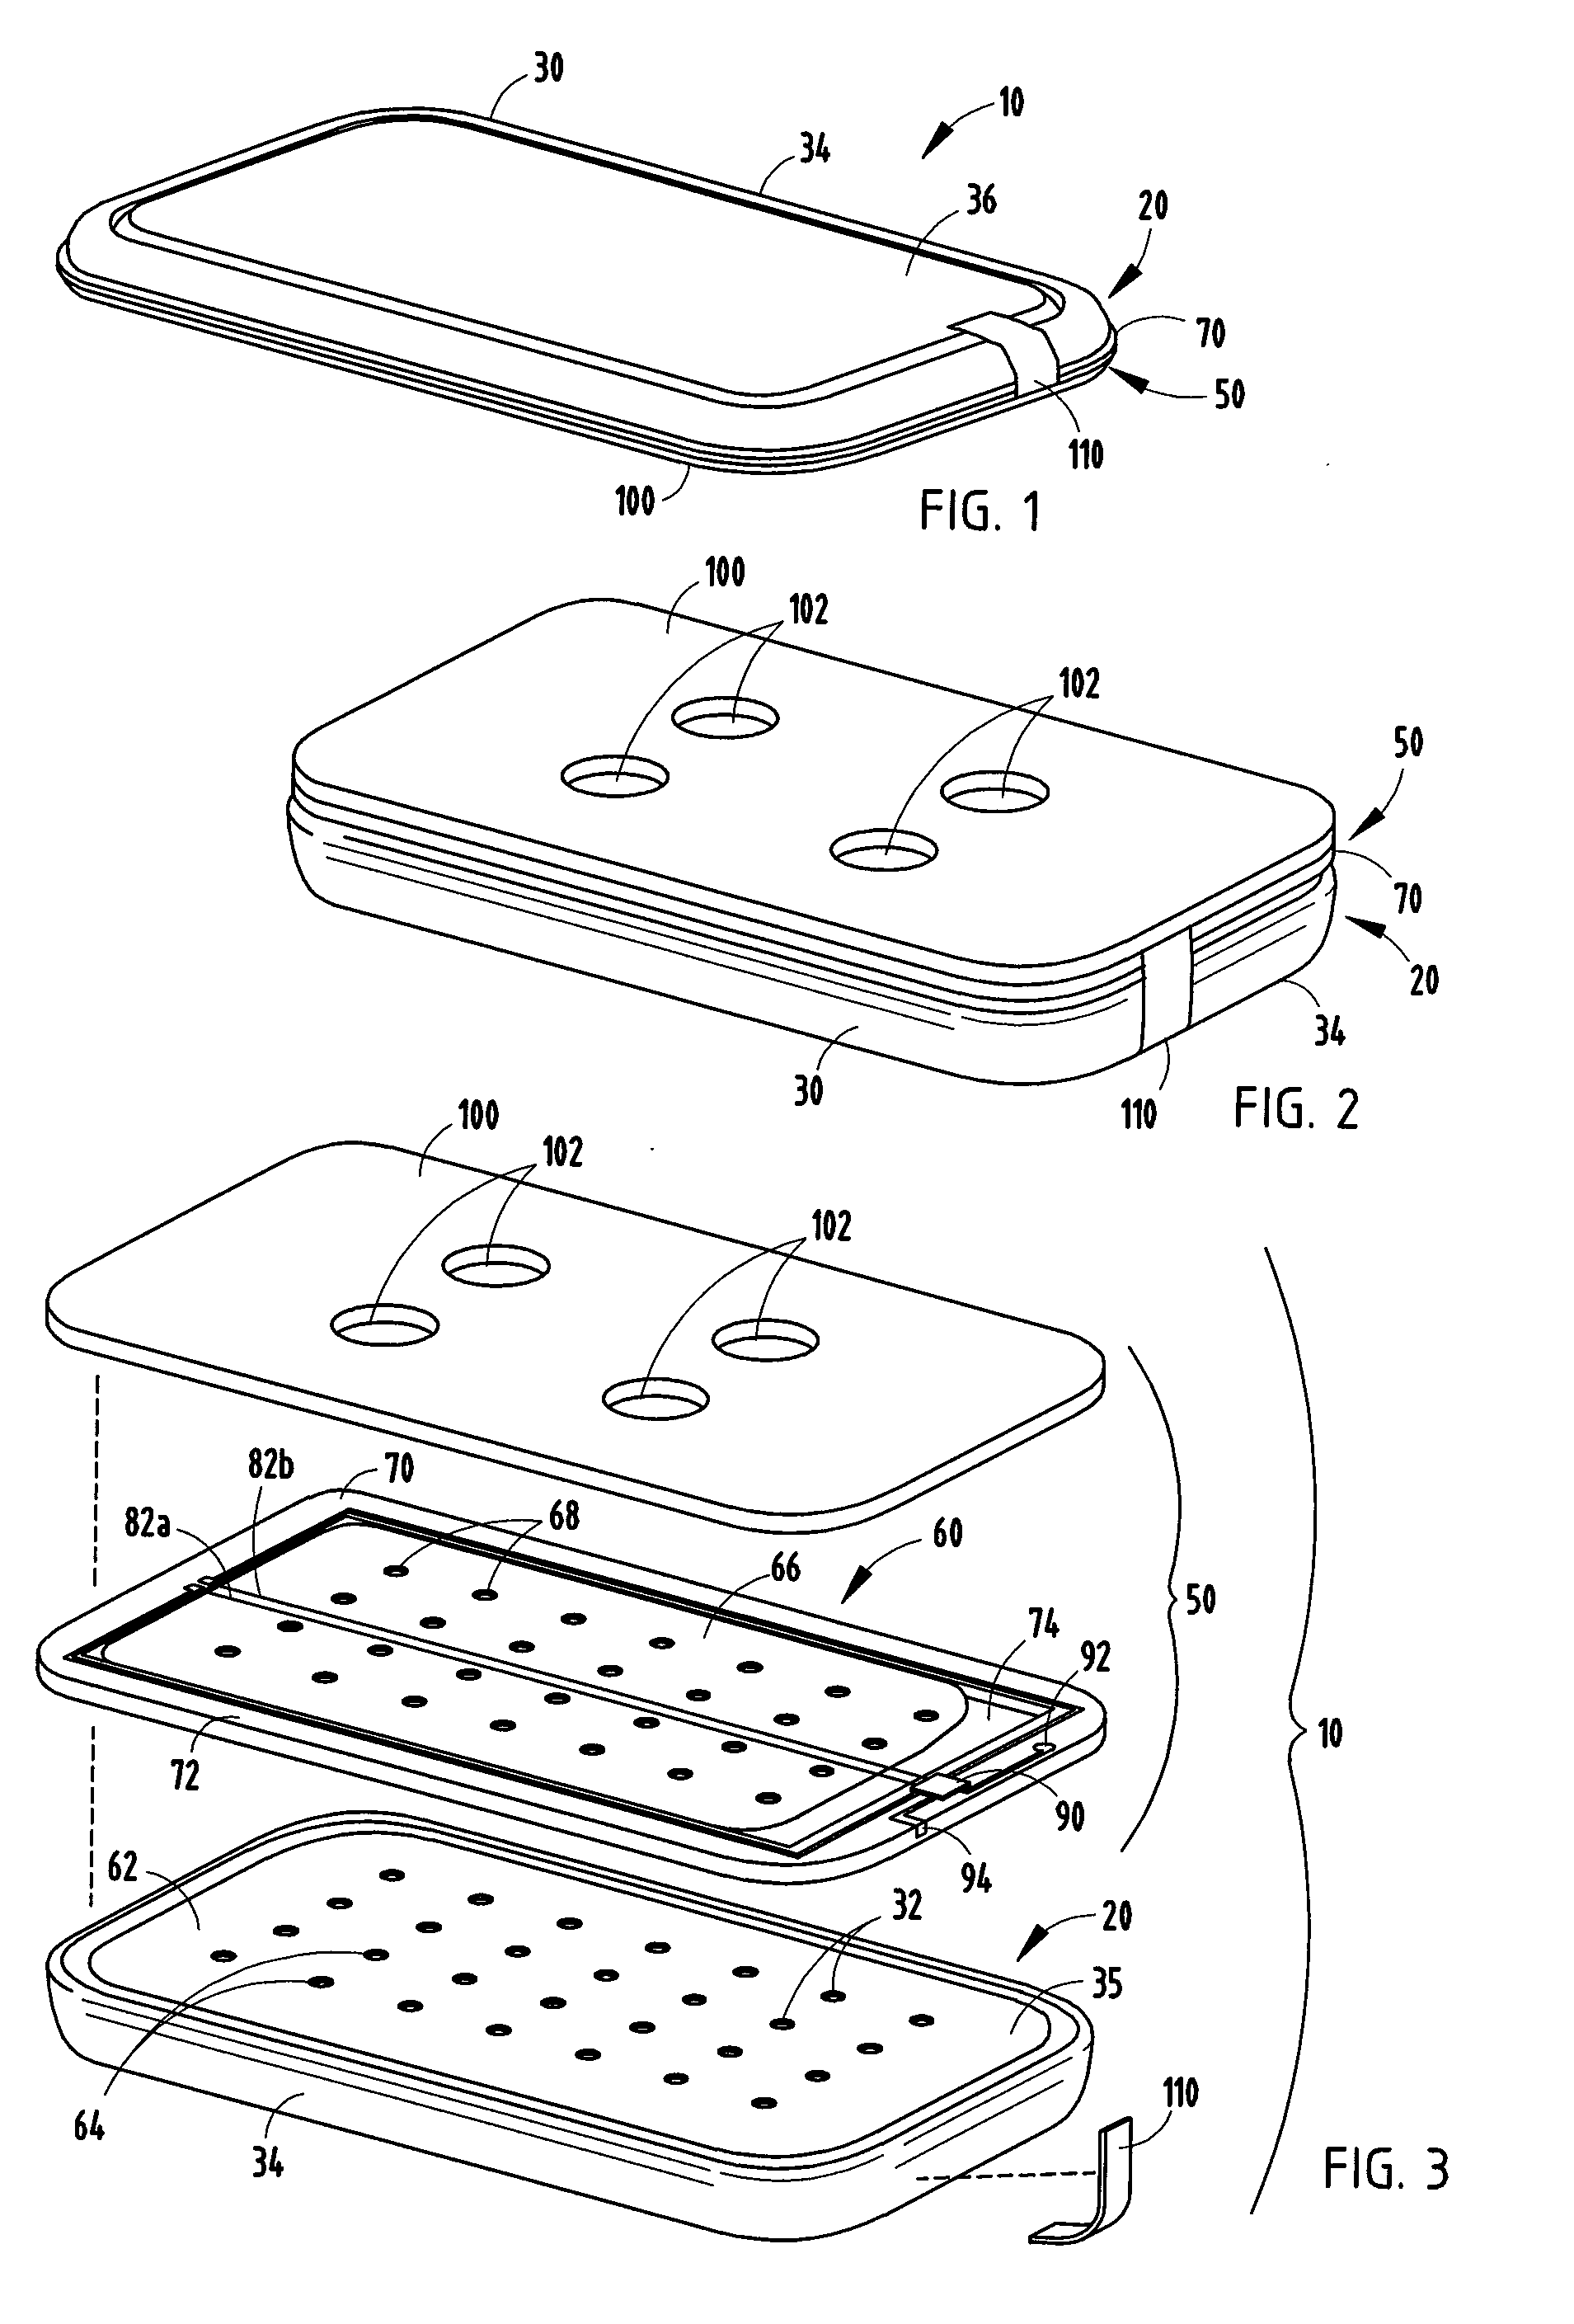 Battery fluid manager using shape memory alloy components with different actuation temperatures